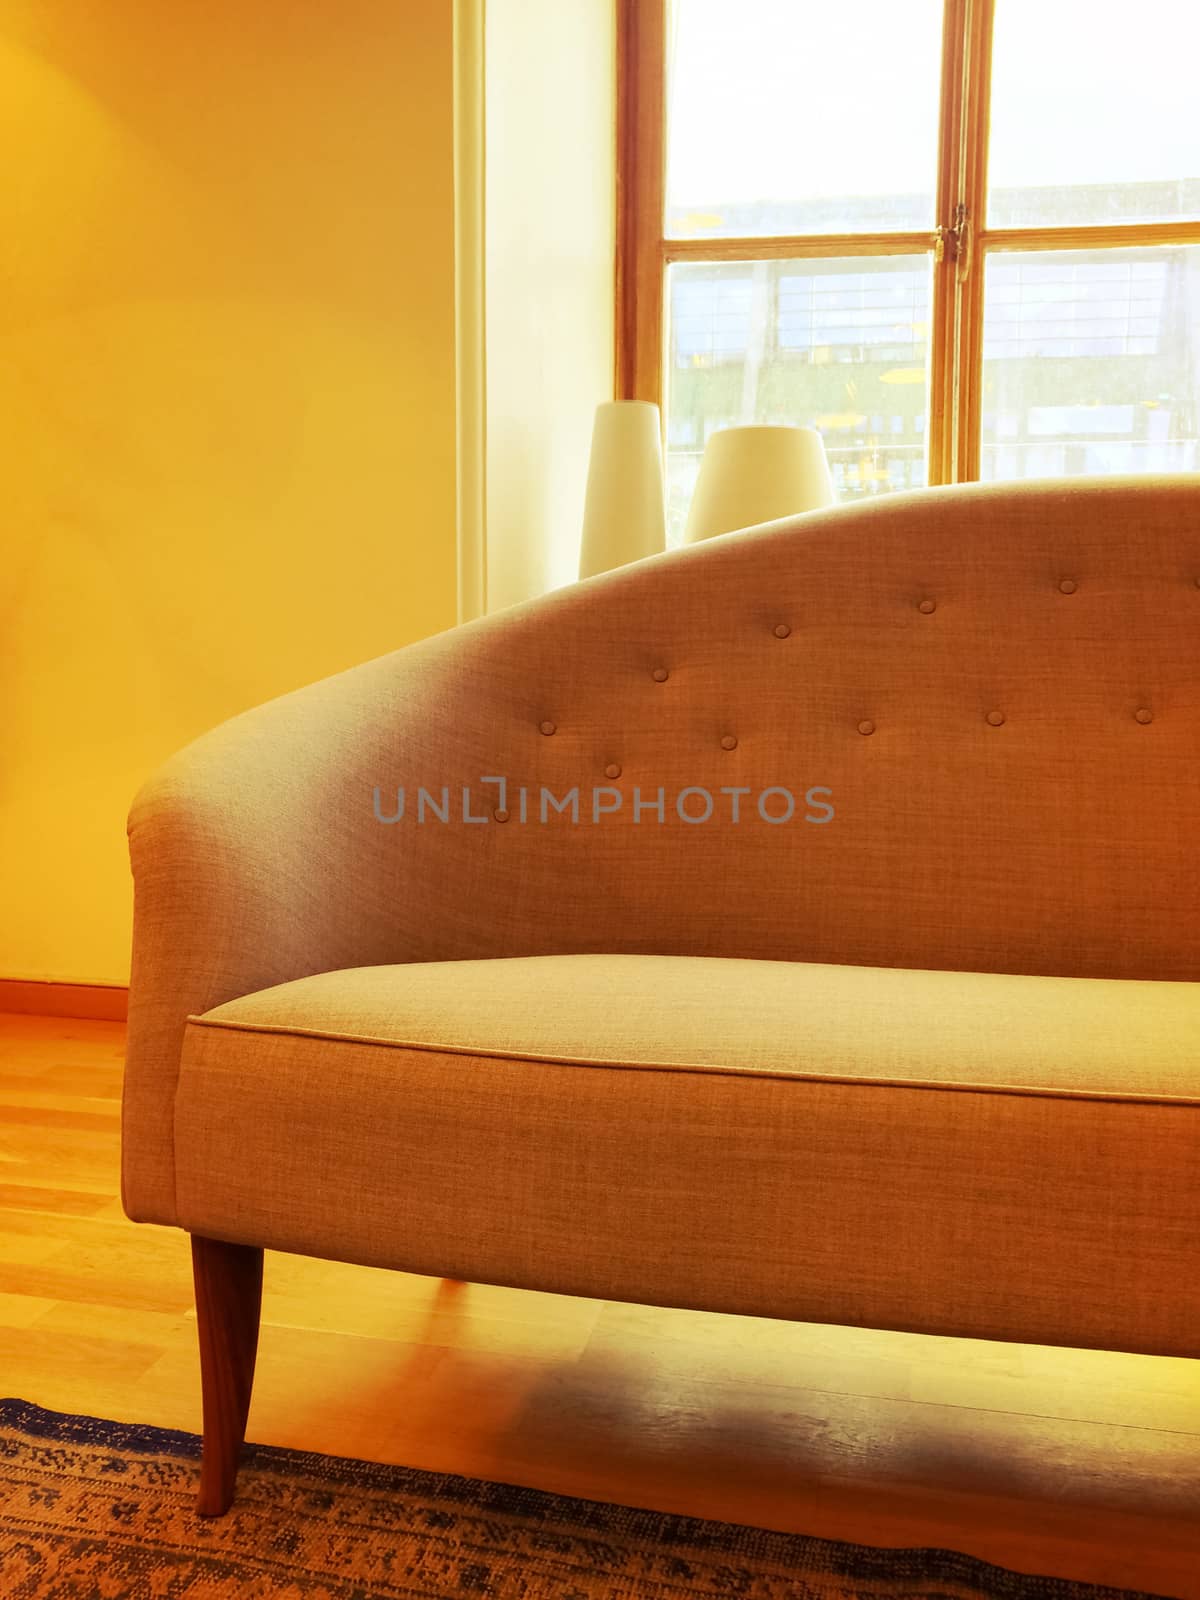 Elegant sofa in a sunlit room with big window by anikasalsera